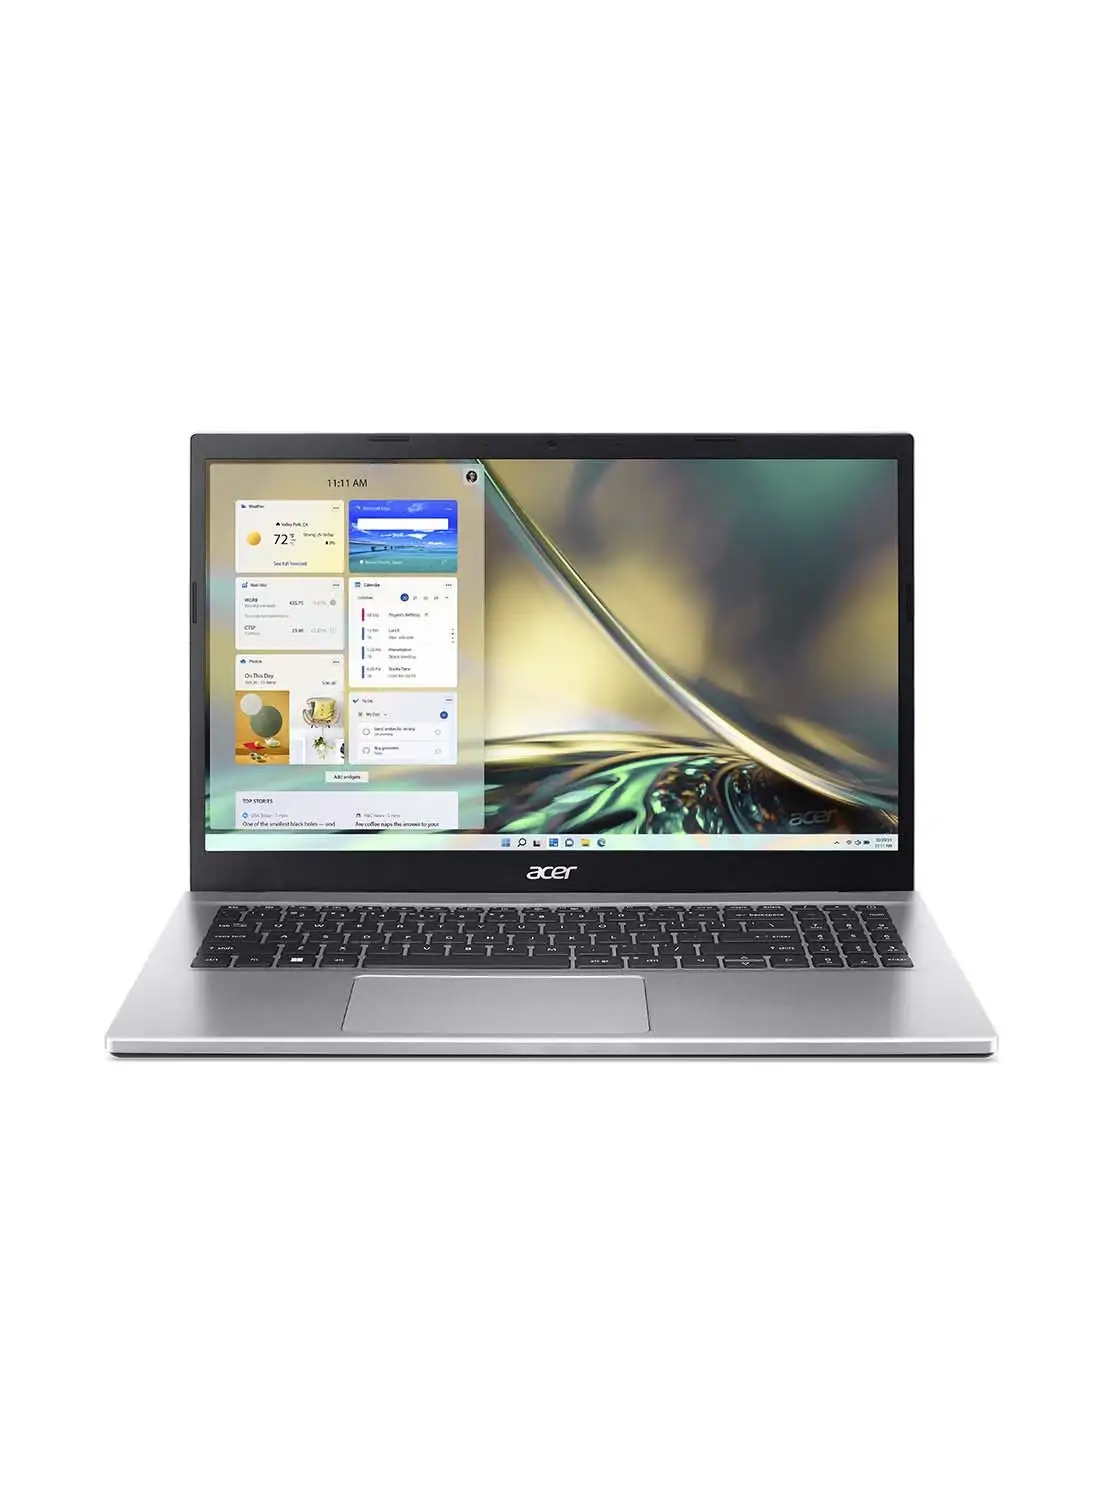 Acer Aspire 3 A315 Notebook With 12Th Gen Intel Core i5-1235U 10 Cores Up To 4.40GHz/8GB DDR4 RAM/512GB SSD Storage/Intel Iris XE Graphics/15.6 Inch FHD IPS Slim Bezel Display/Win 11 Home English/Arabic Pure Silver